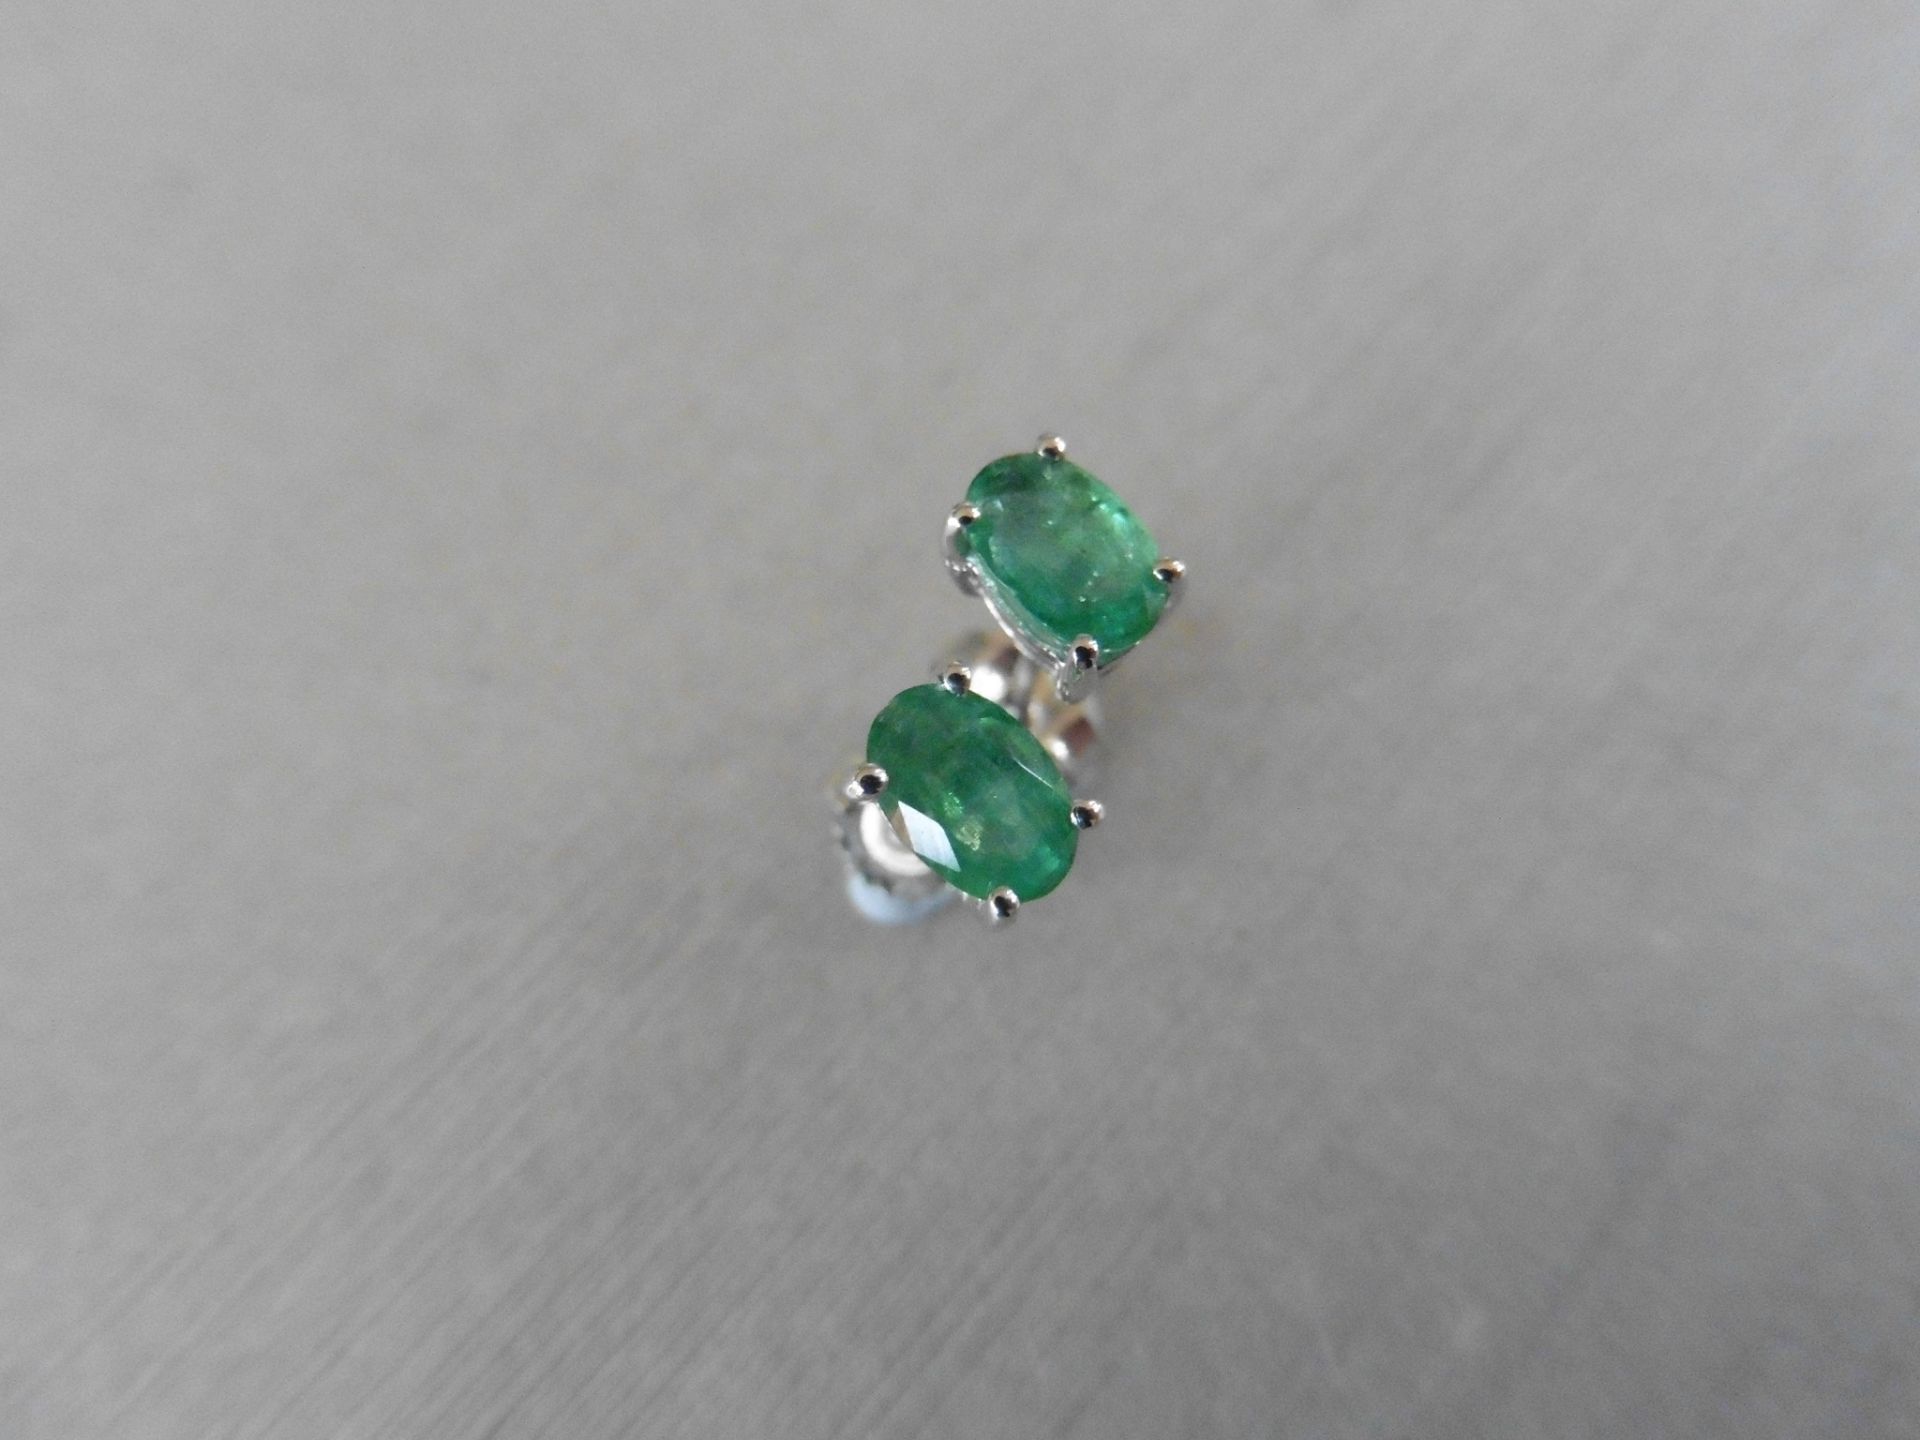 0.60ct emerald stud style earrings set in 9ct white gold. 6 x 4mm oval cut emeralds ( treated) set